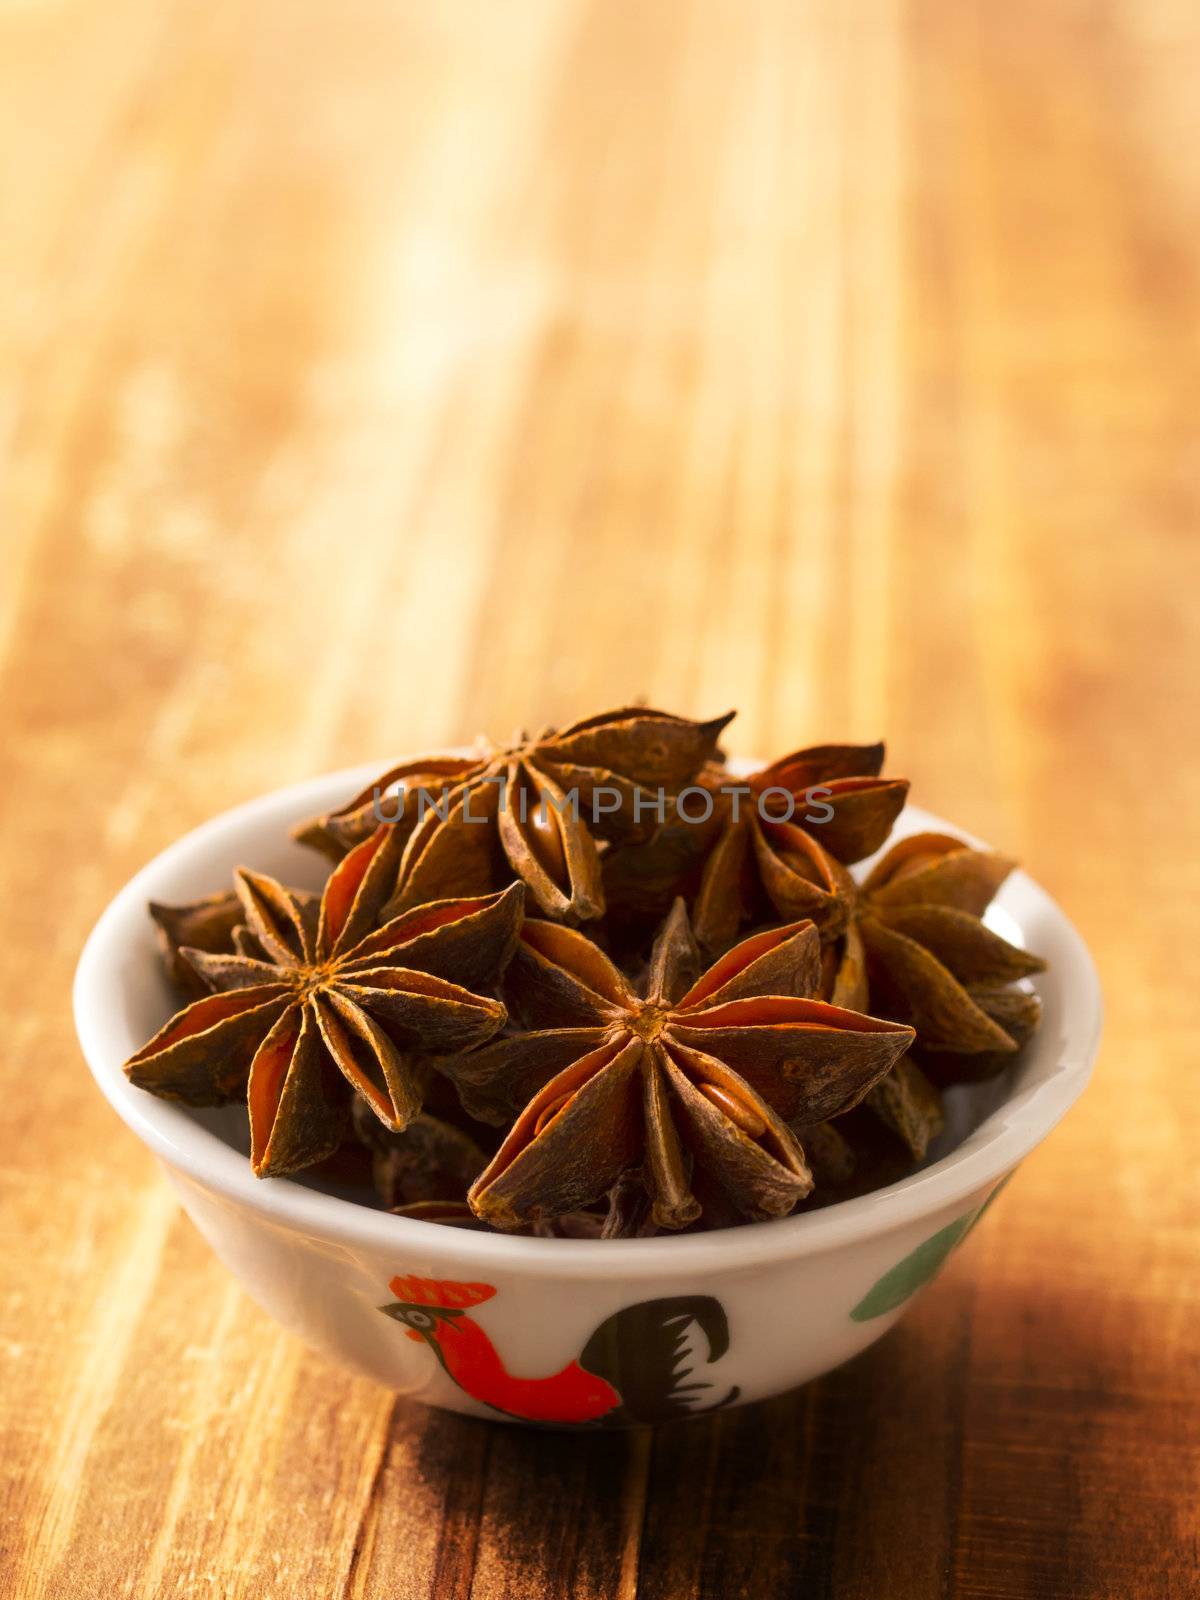 star anise by zkruger